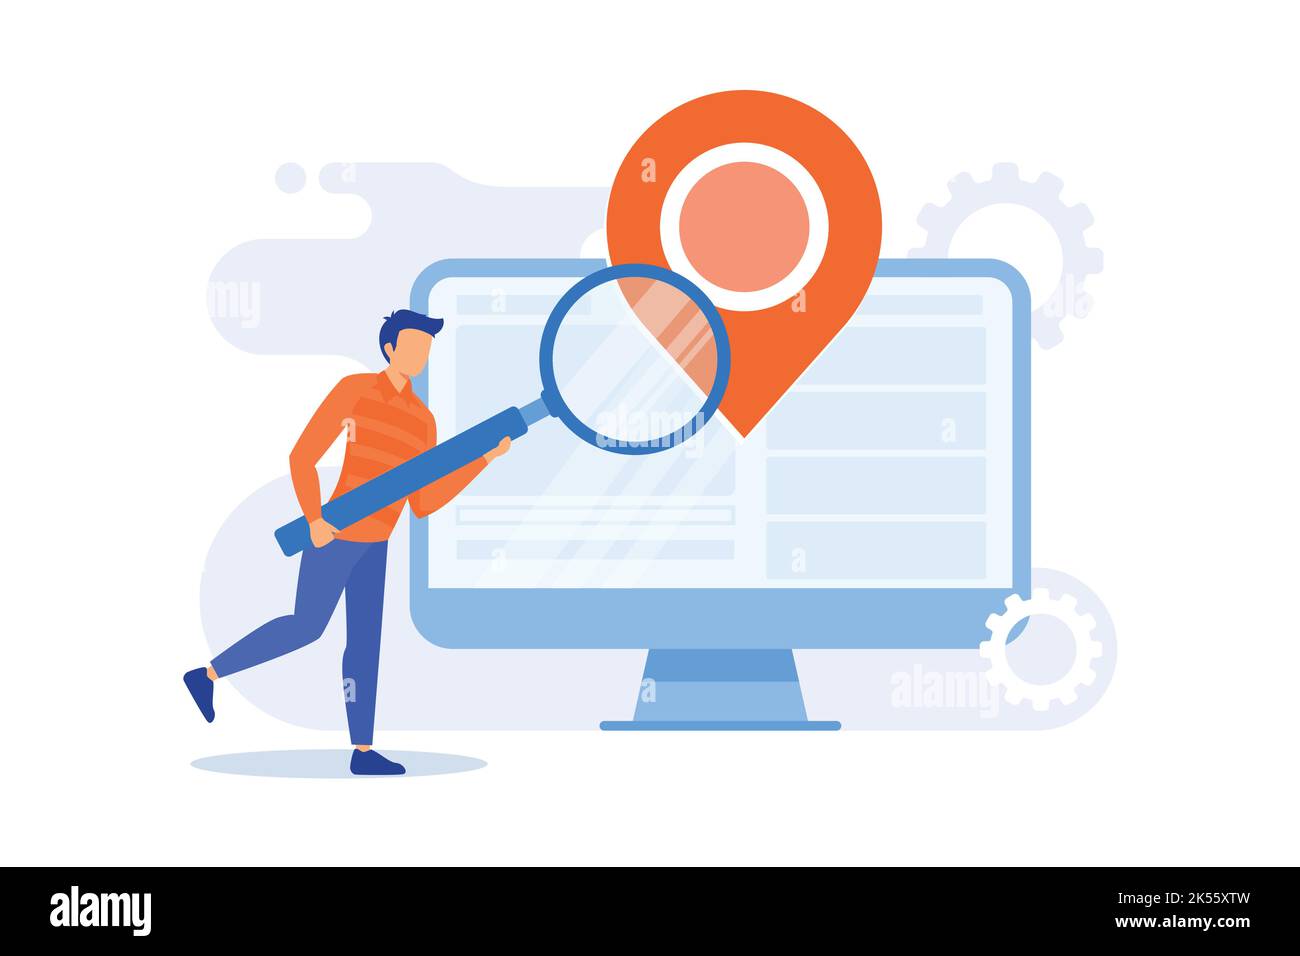 Location based advertisement. Geolocation software, online gps app, navigation system. Geographic restriction. Man searching address with magnifier. V Stock Vector